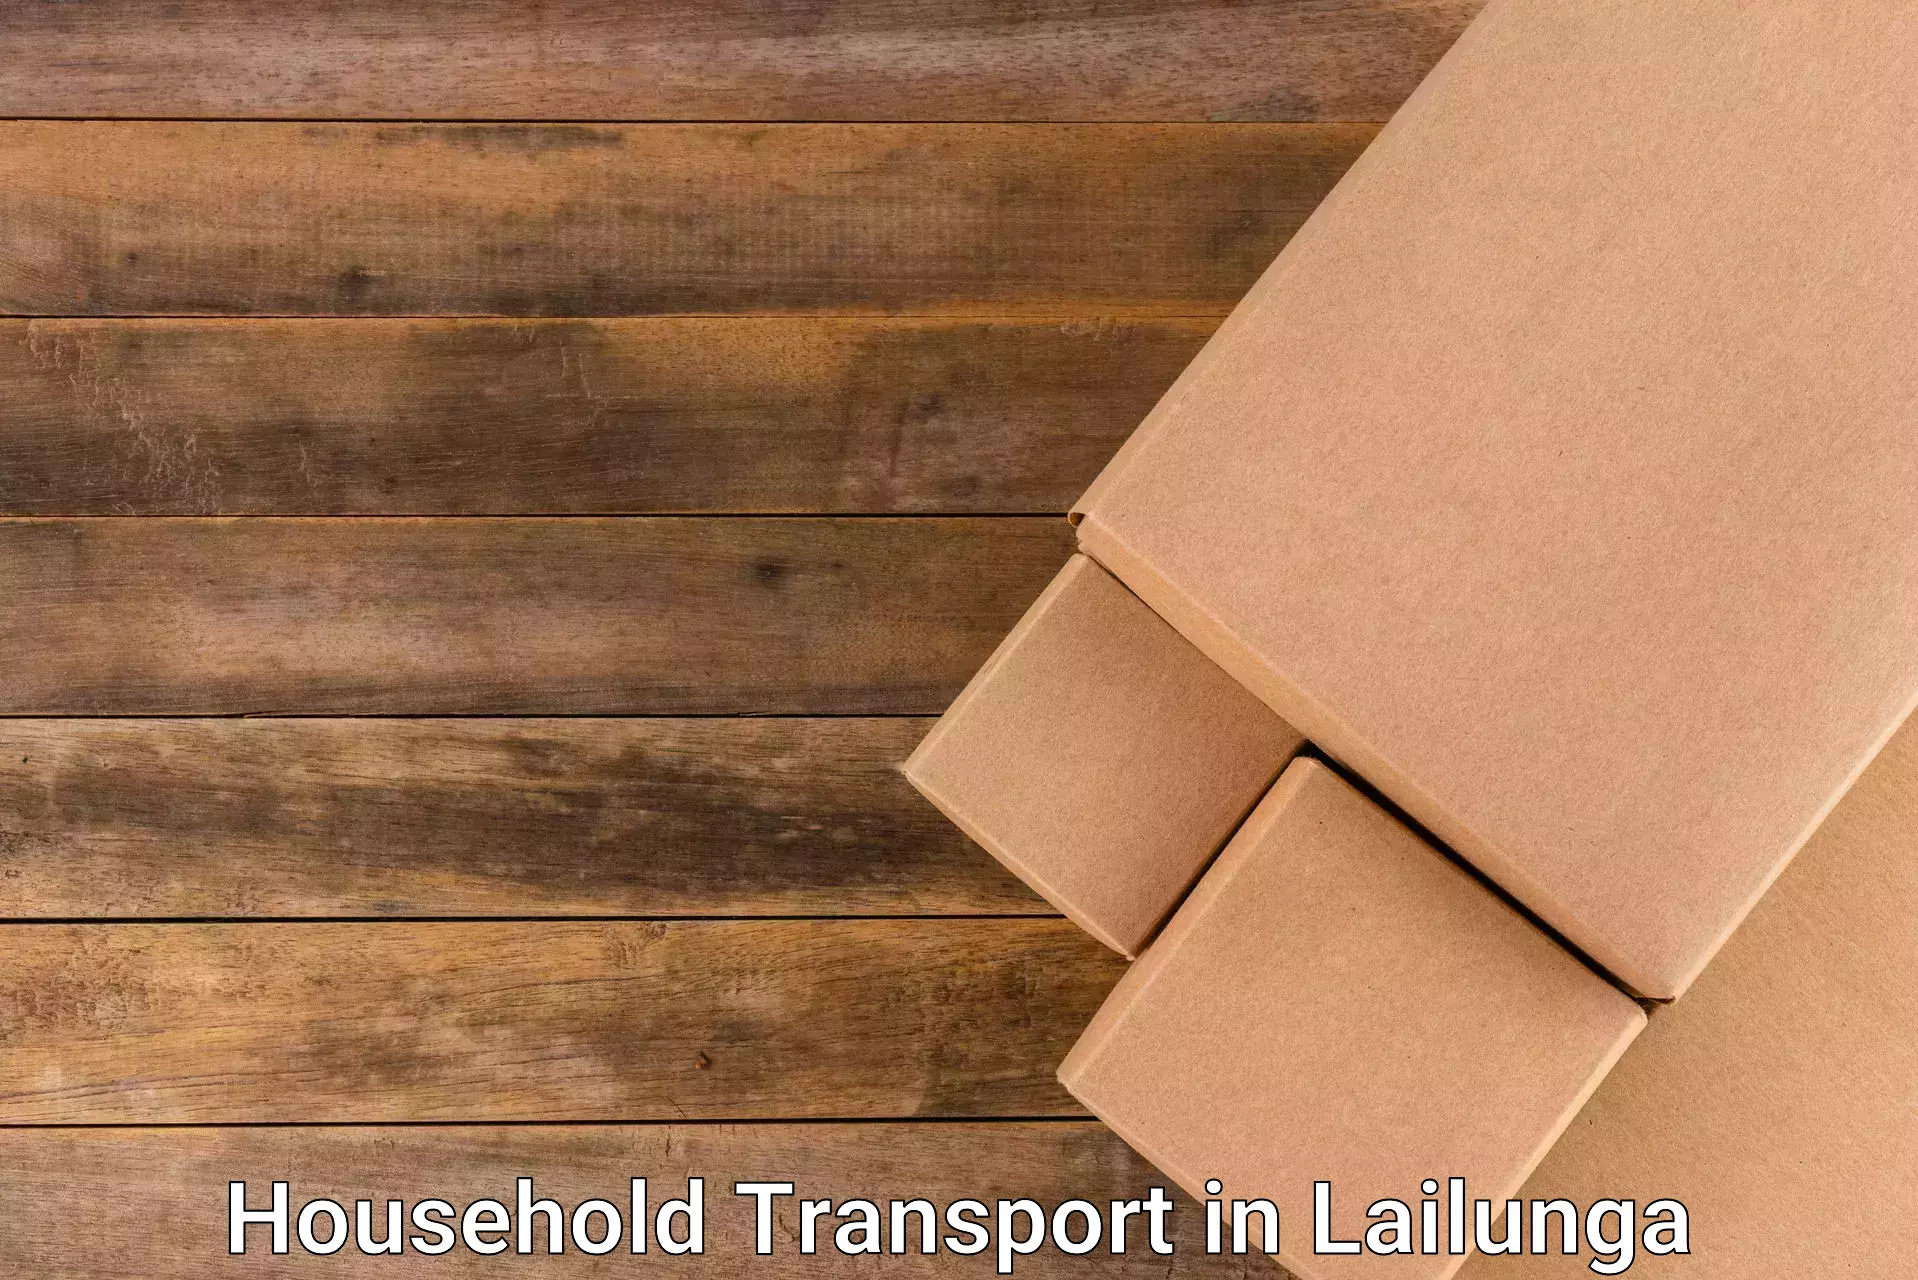 Moving and handling services in Lailunga